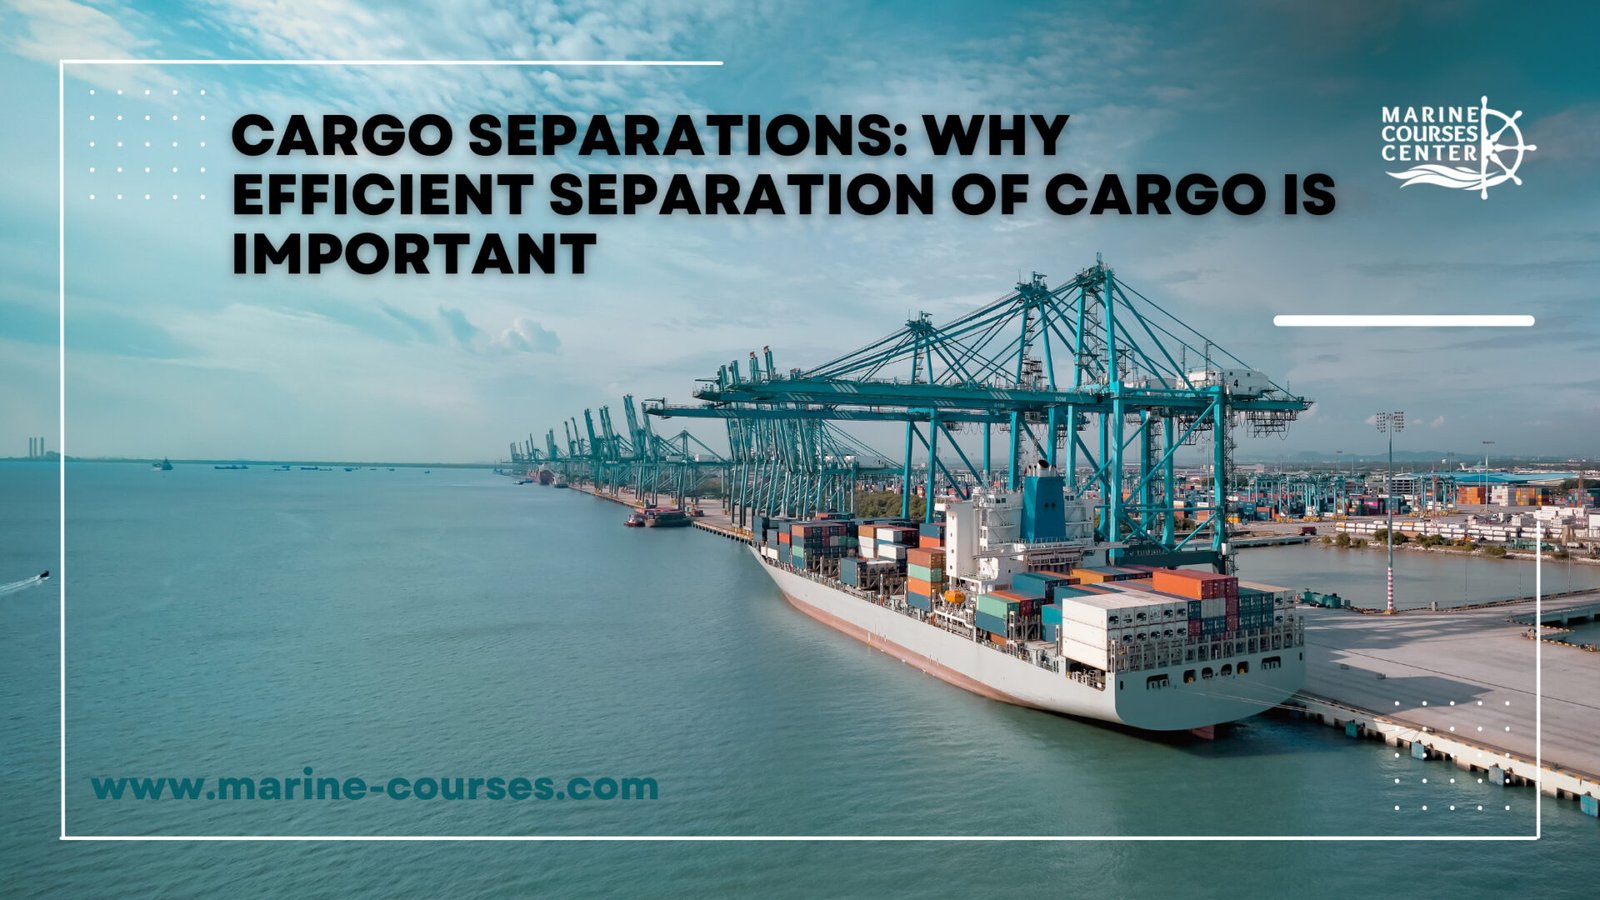 Cargo Separations Why Efficient Separation of Cargo is Important